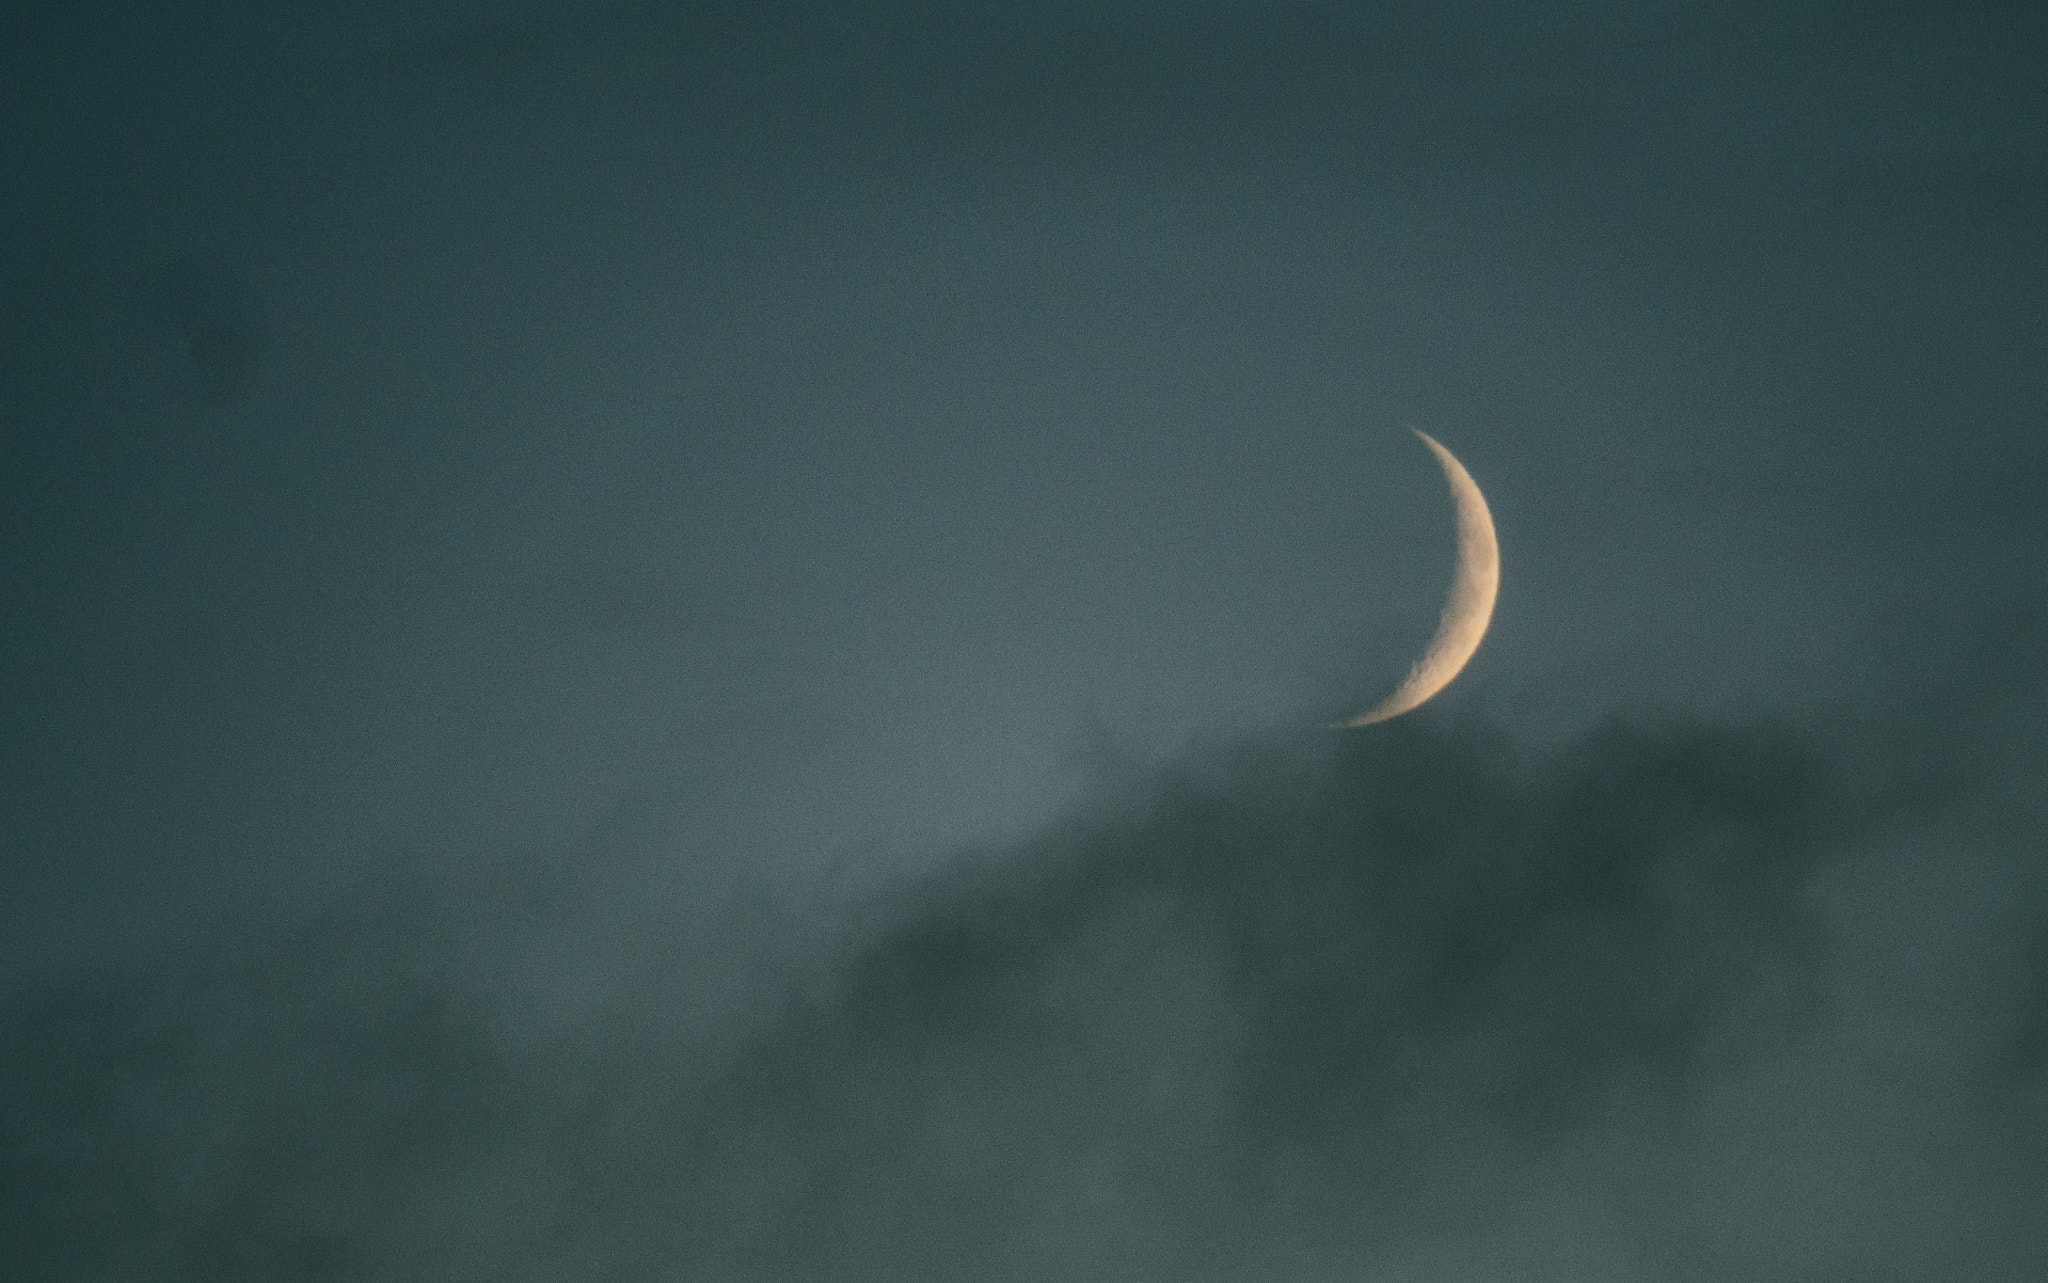 Olympus OM-D E-M5 II sample photo. The crescent moon photography